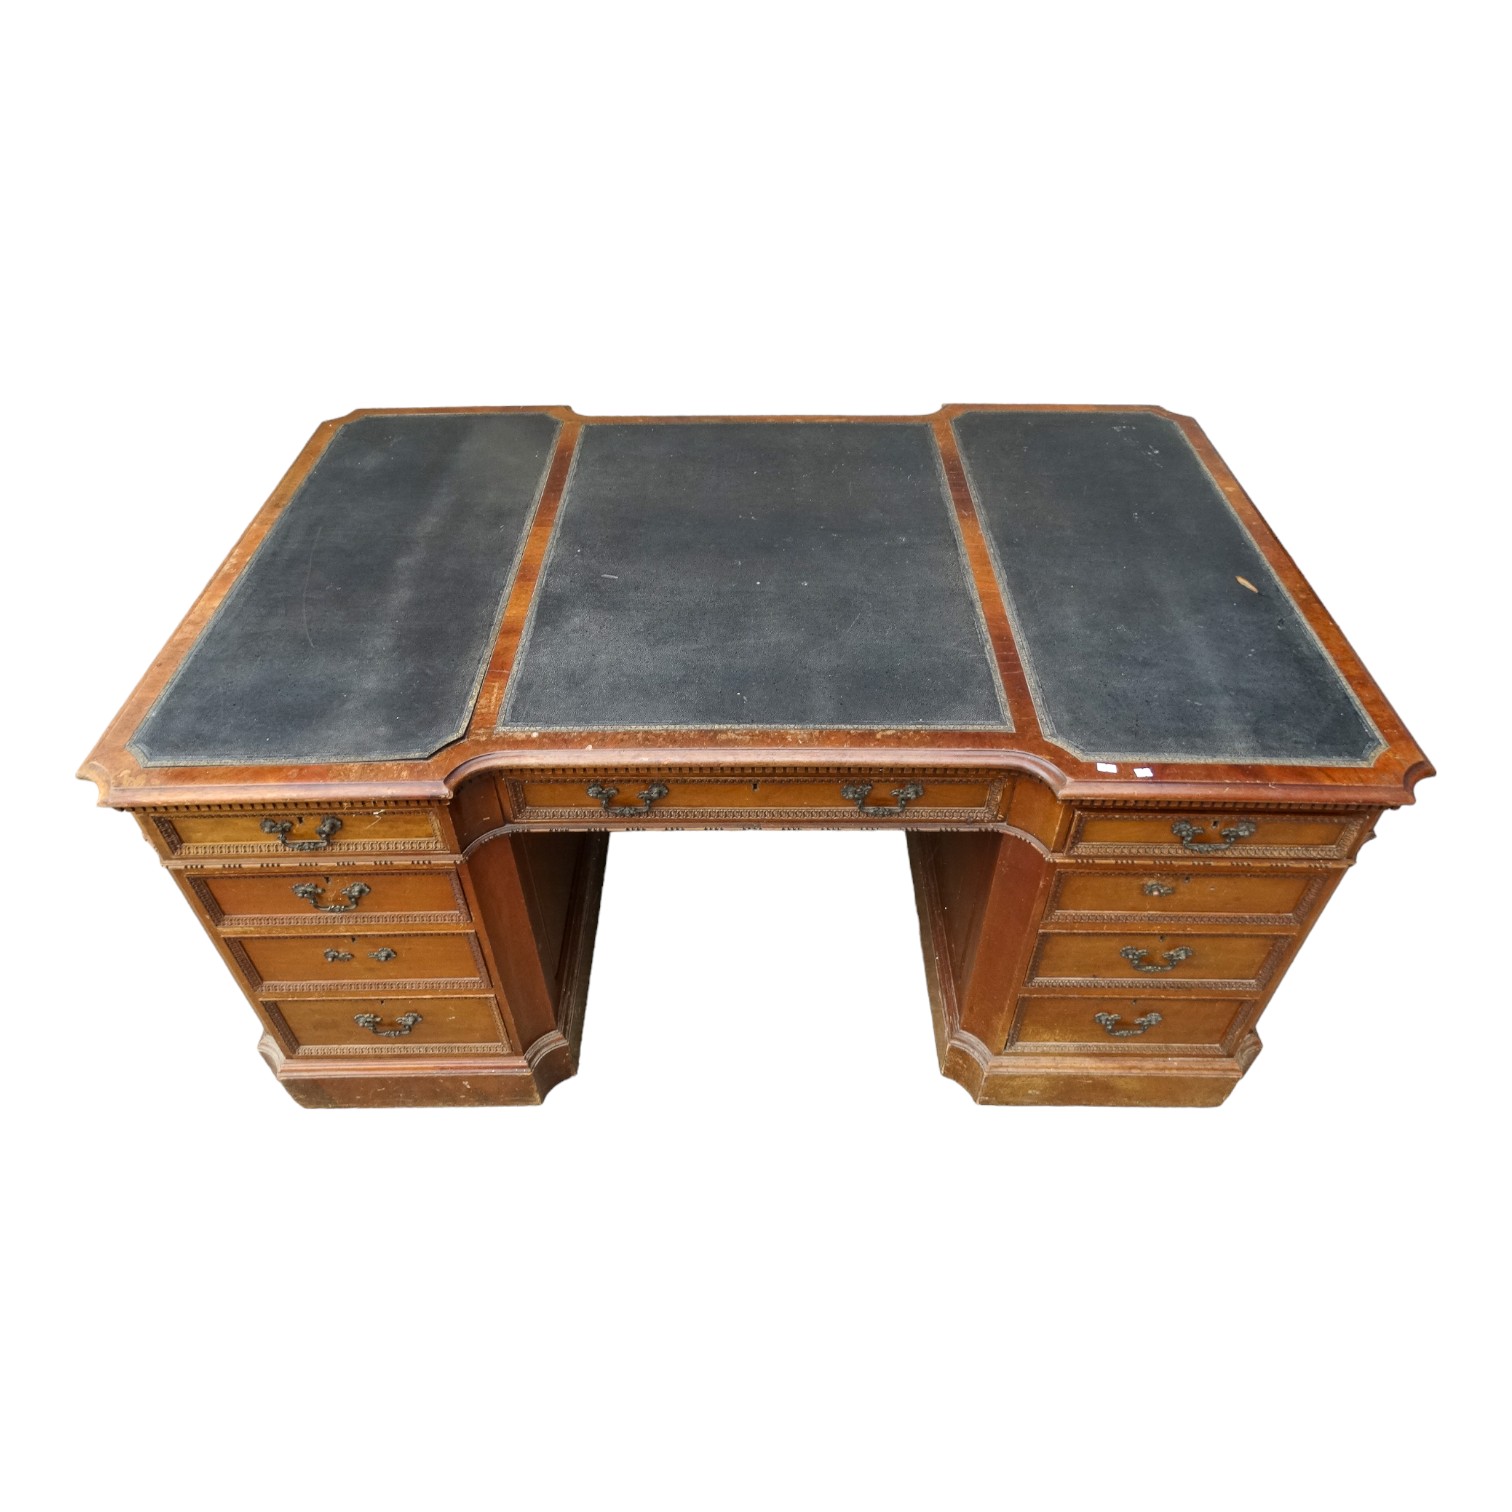 A George III stye mahogany partners desk - the leather inset top incorporating an inverted break - Image 2 of 3